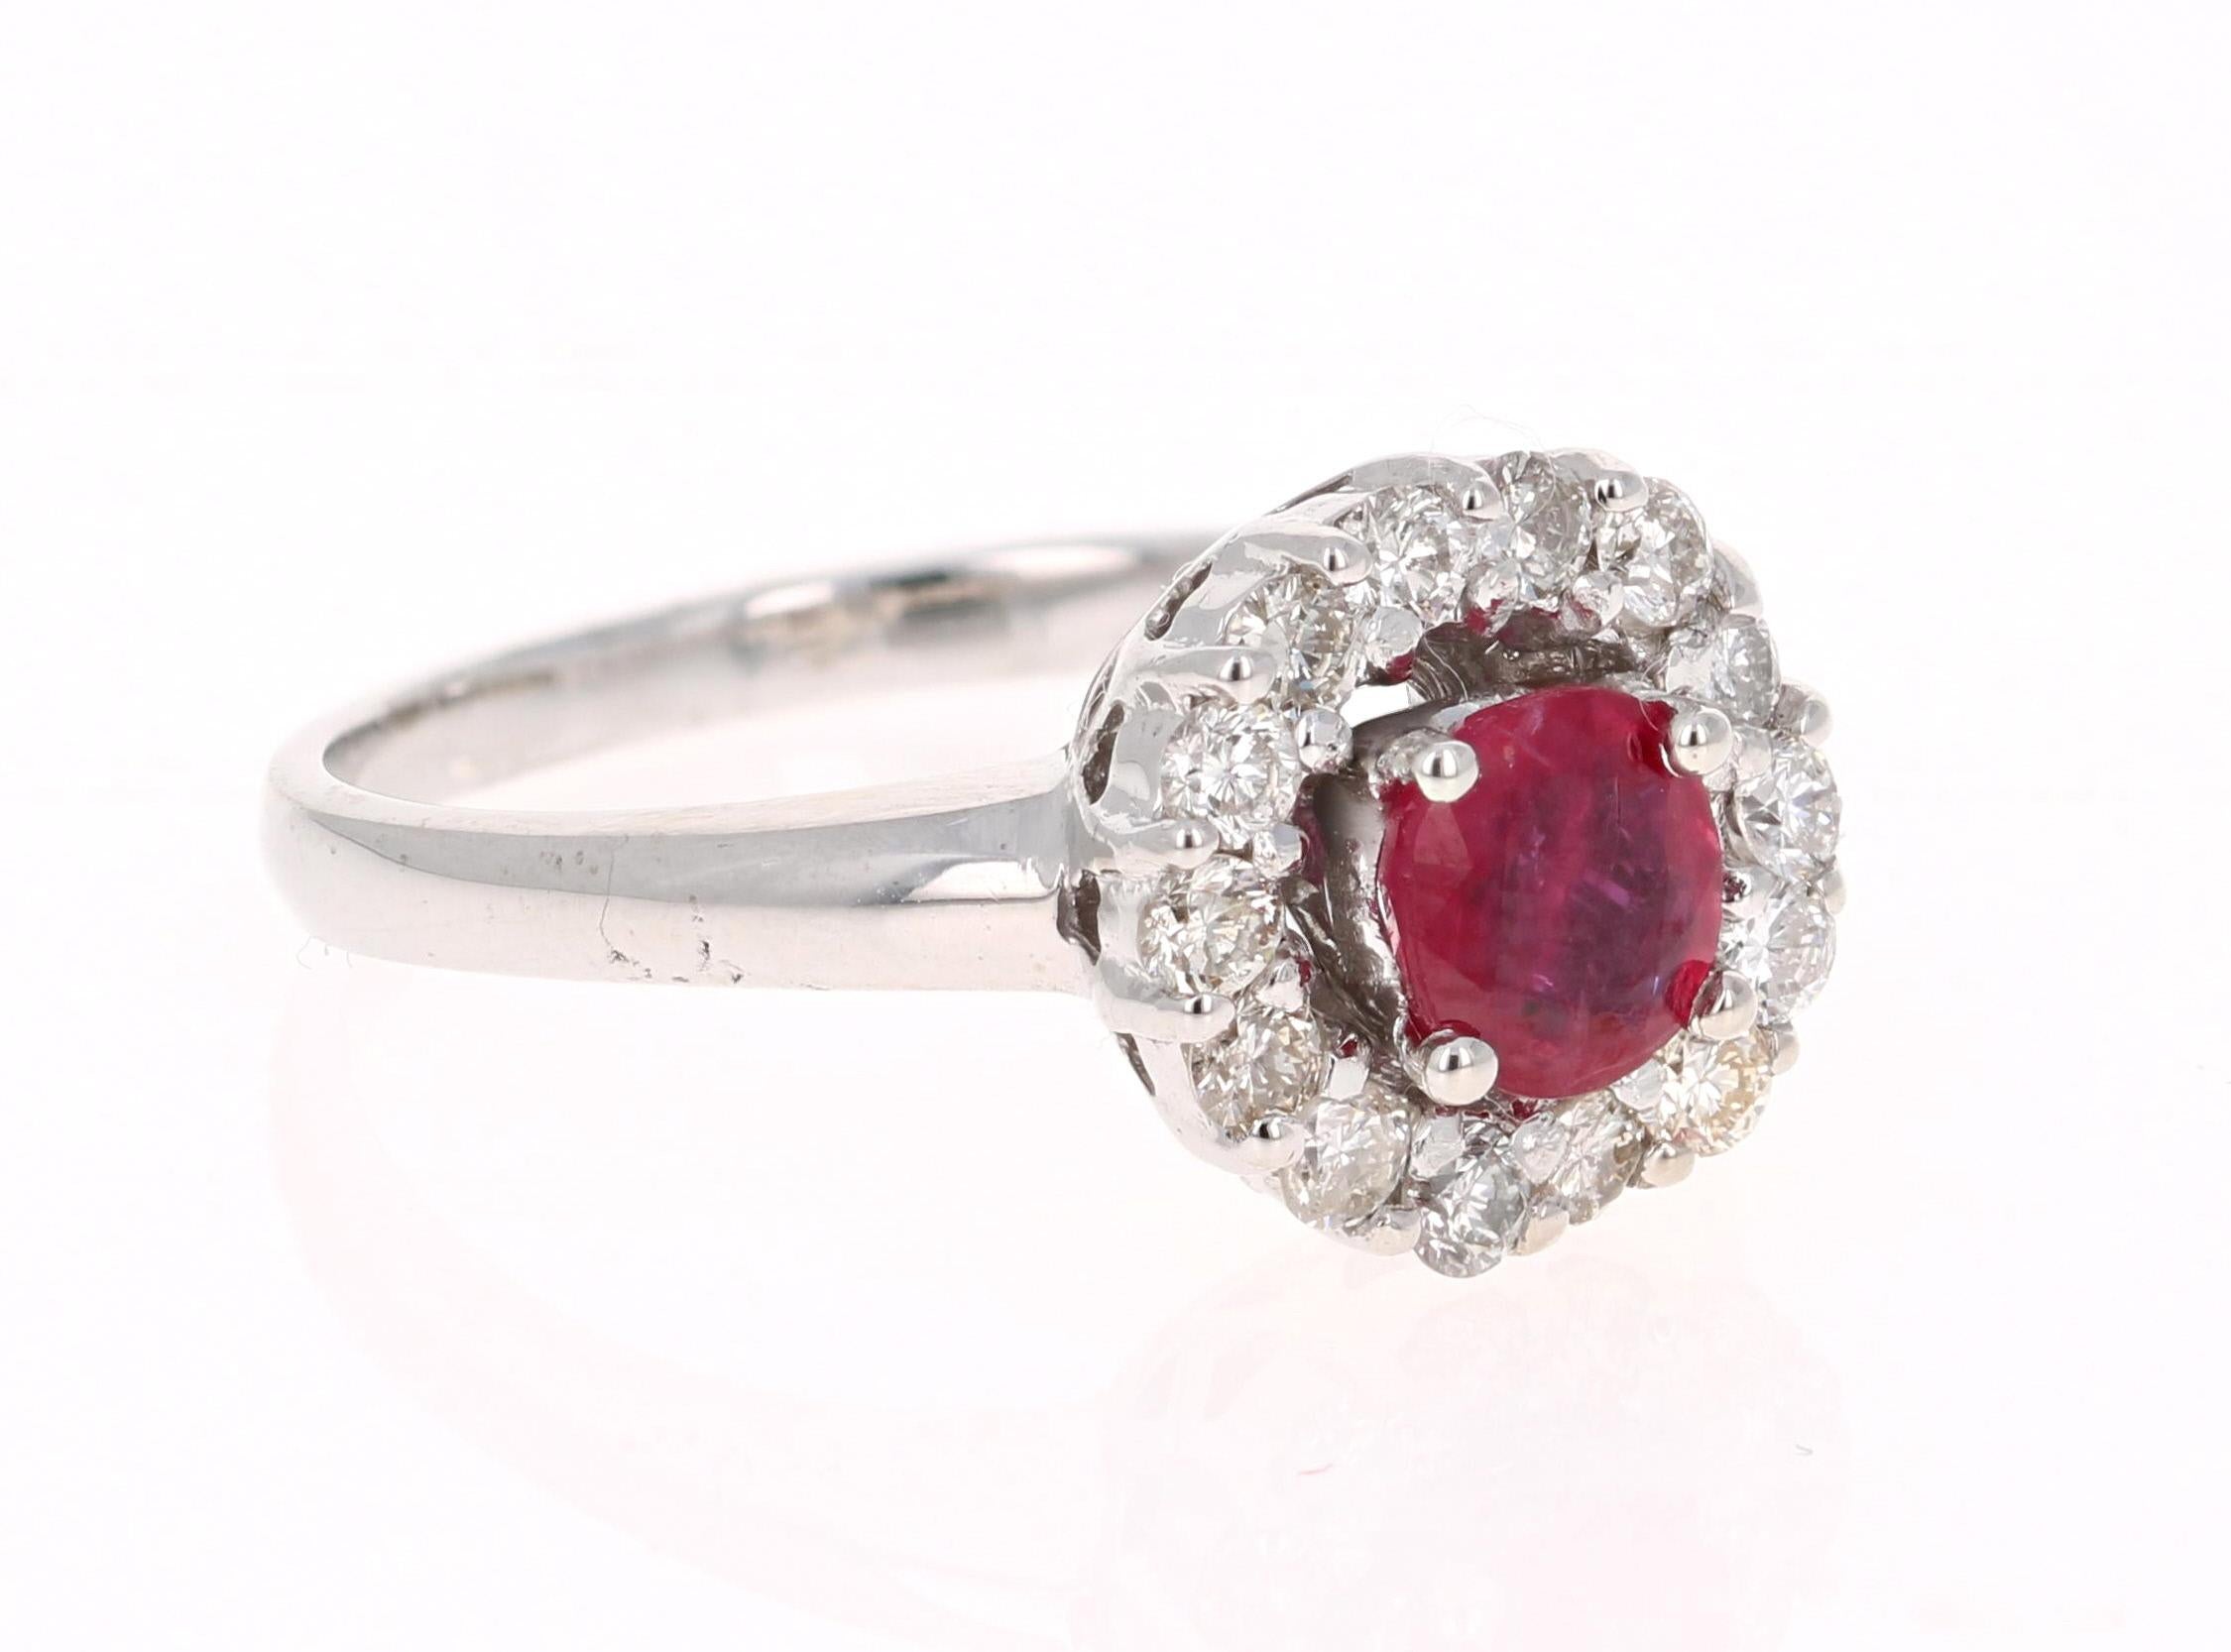 Simply beautiful Ruby Diamond Ring with a Round Cut 0.74 Carat Burmese Ruby which is surrounded by 14 Round Cut Diamonds that weigh 0.49 carats. The total carat weight of the ring is 1.23 carats.

The ring is casted in 14K White Gold and weighs